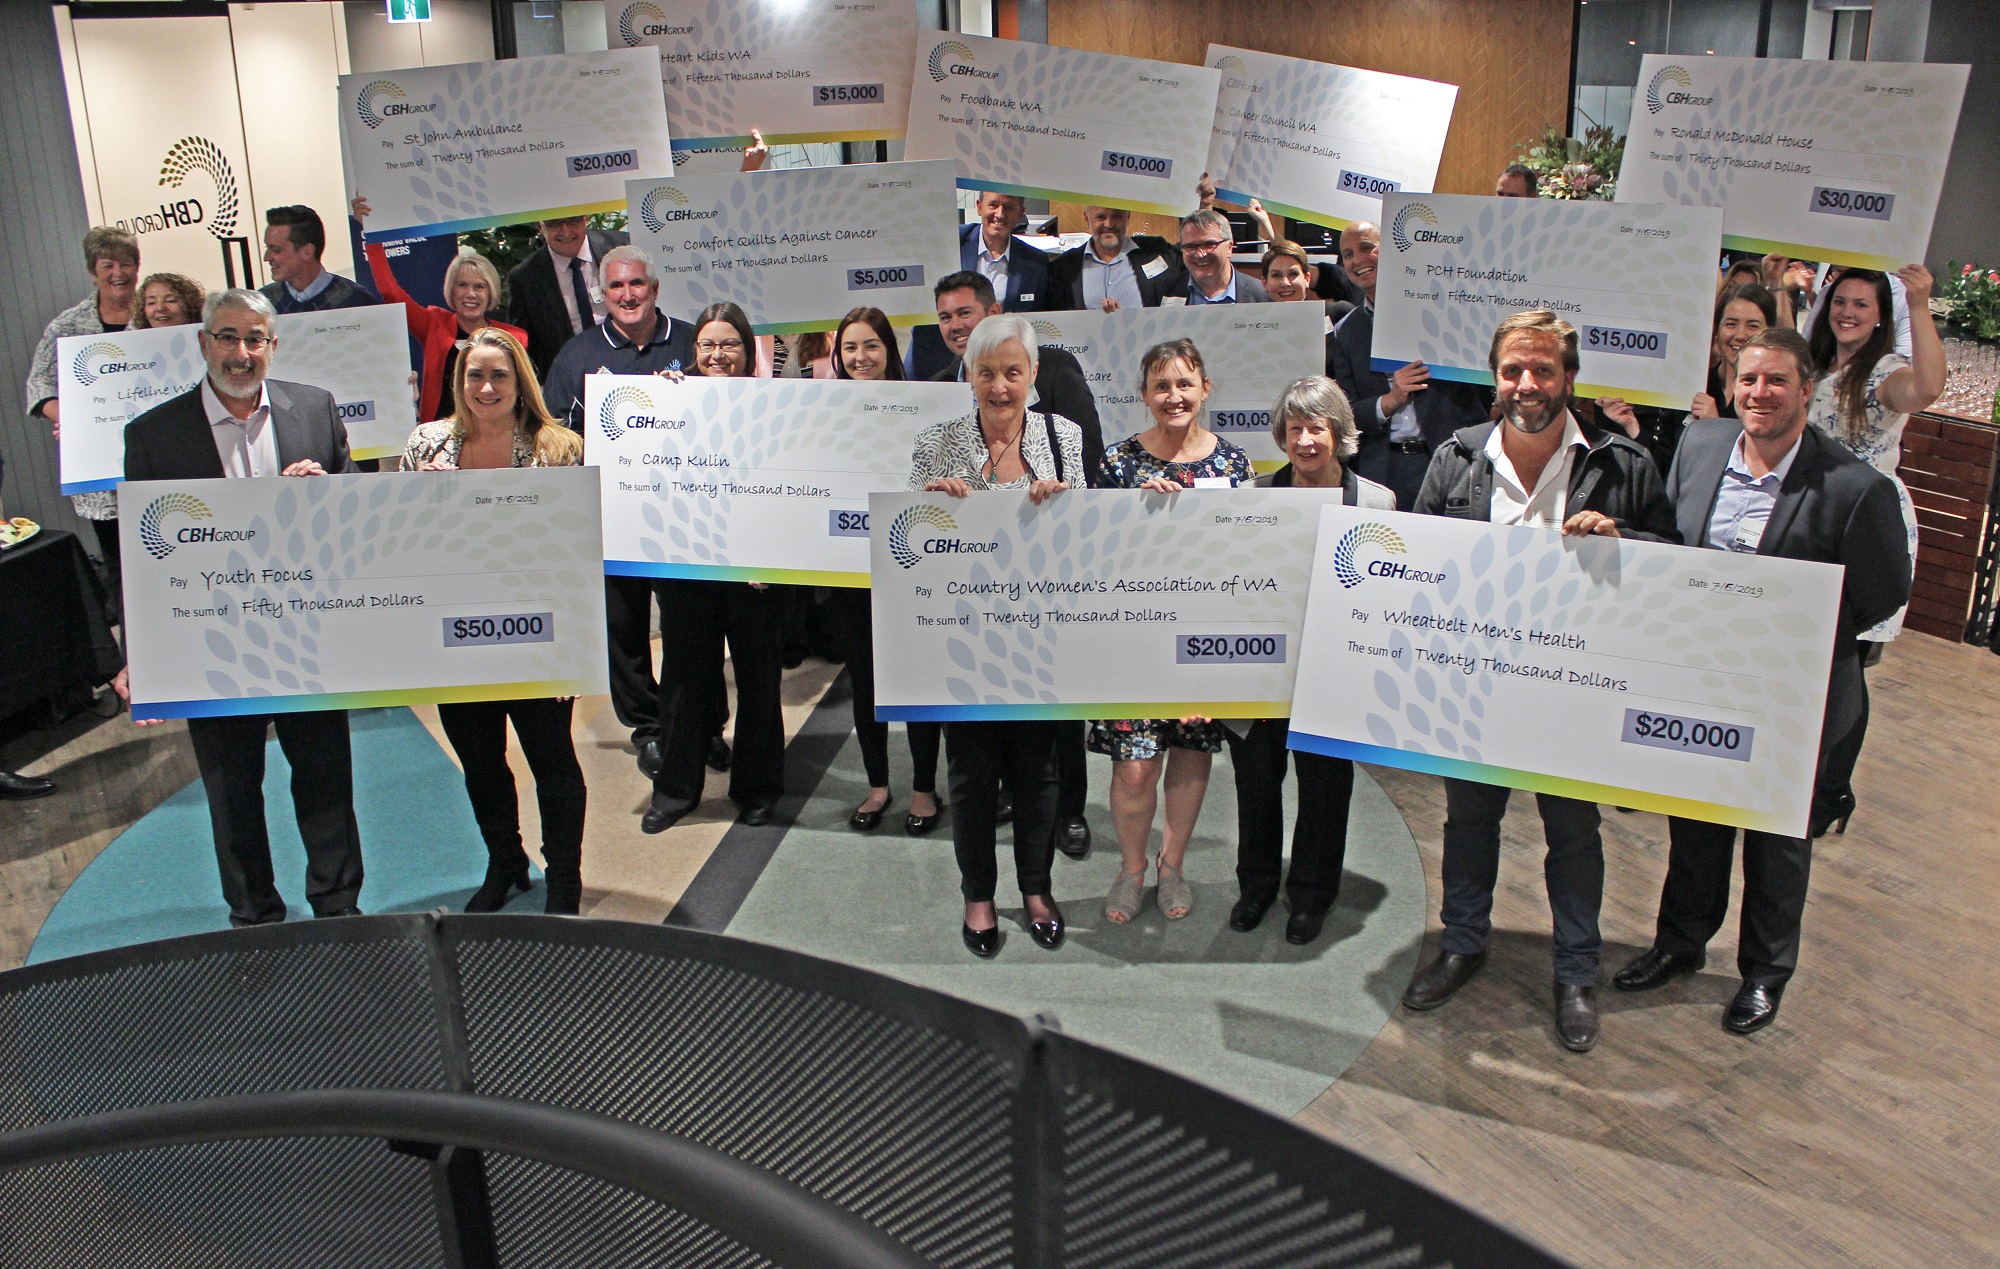 Groups of HMMS donation recipients holding giant cheques smiling